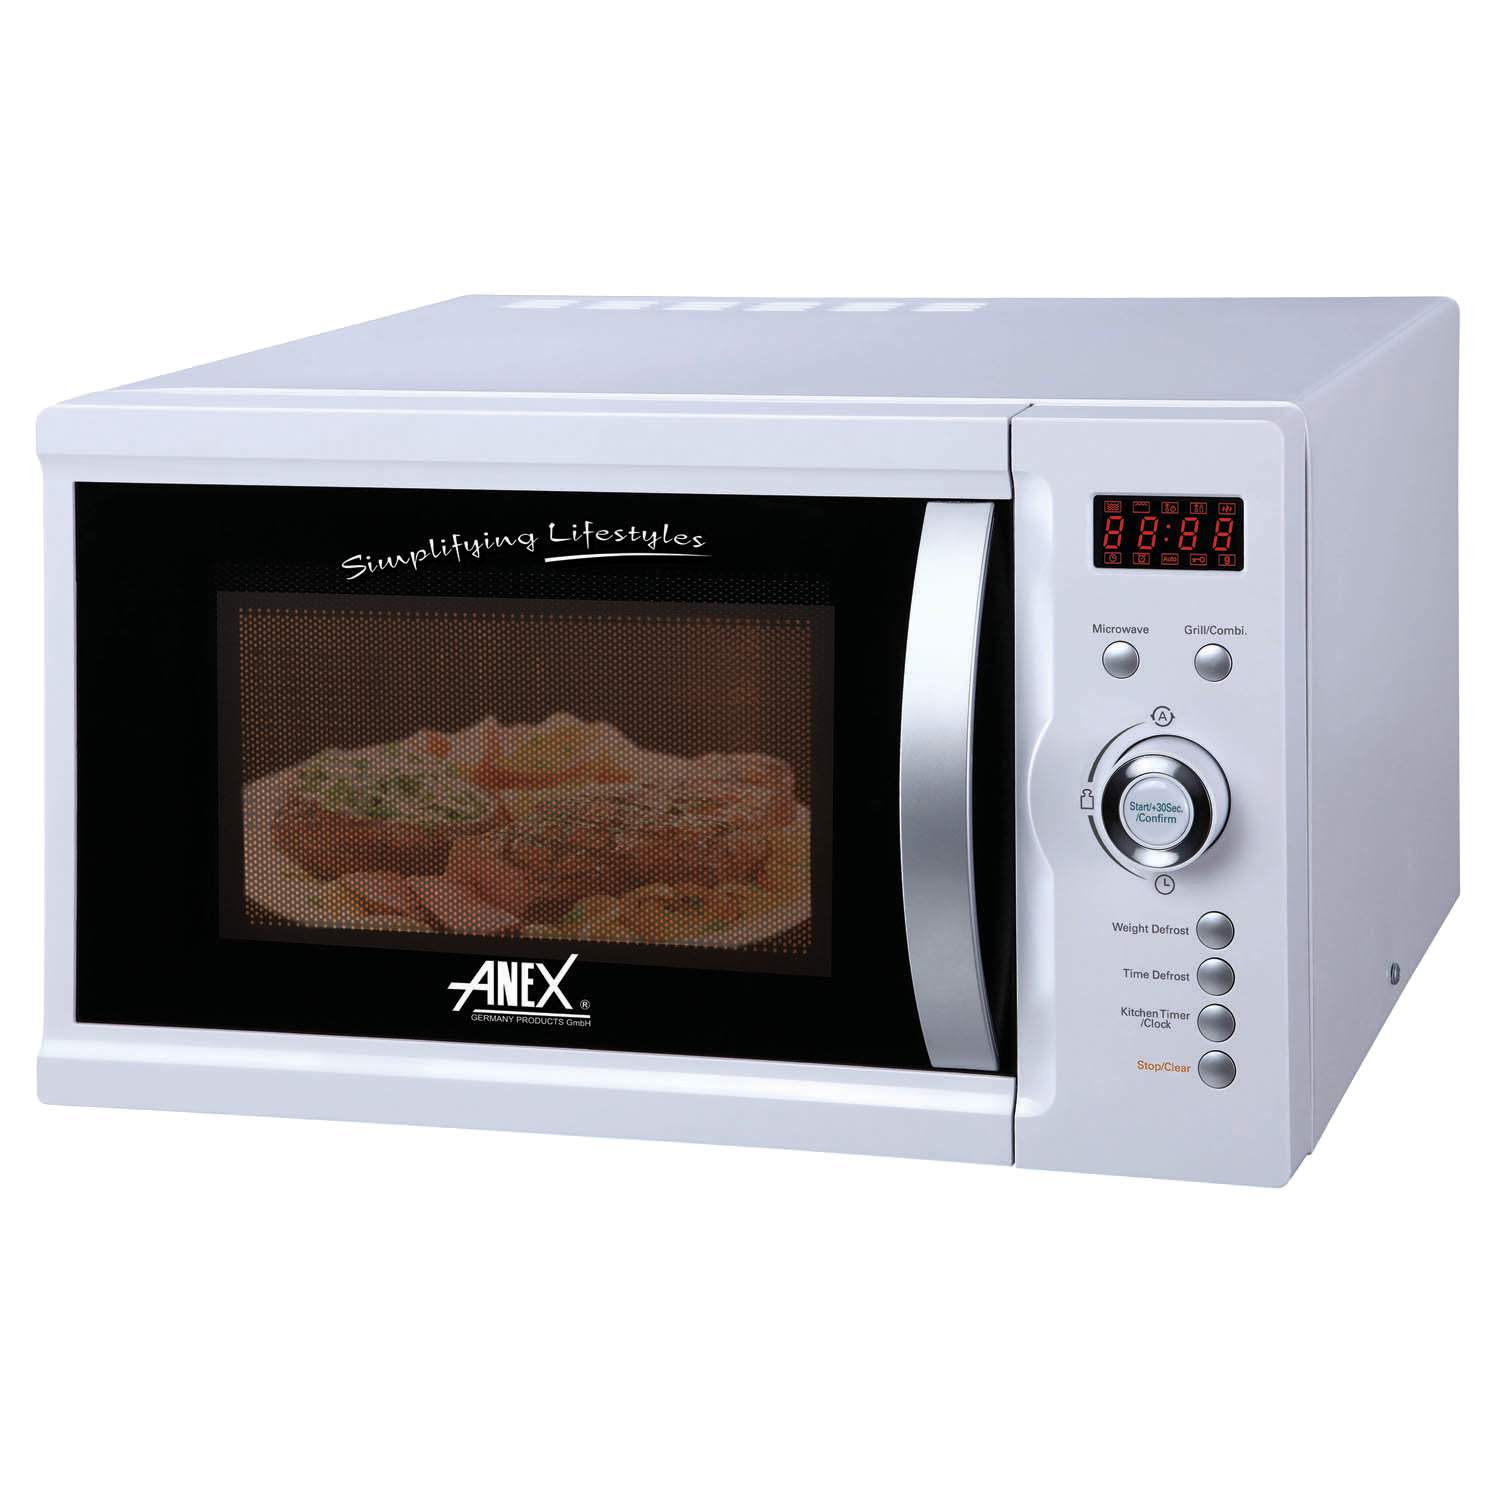 Clipart science microwaves, Clipart science microwaves Transparent FREE